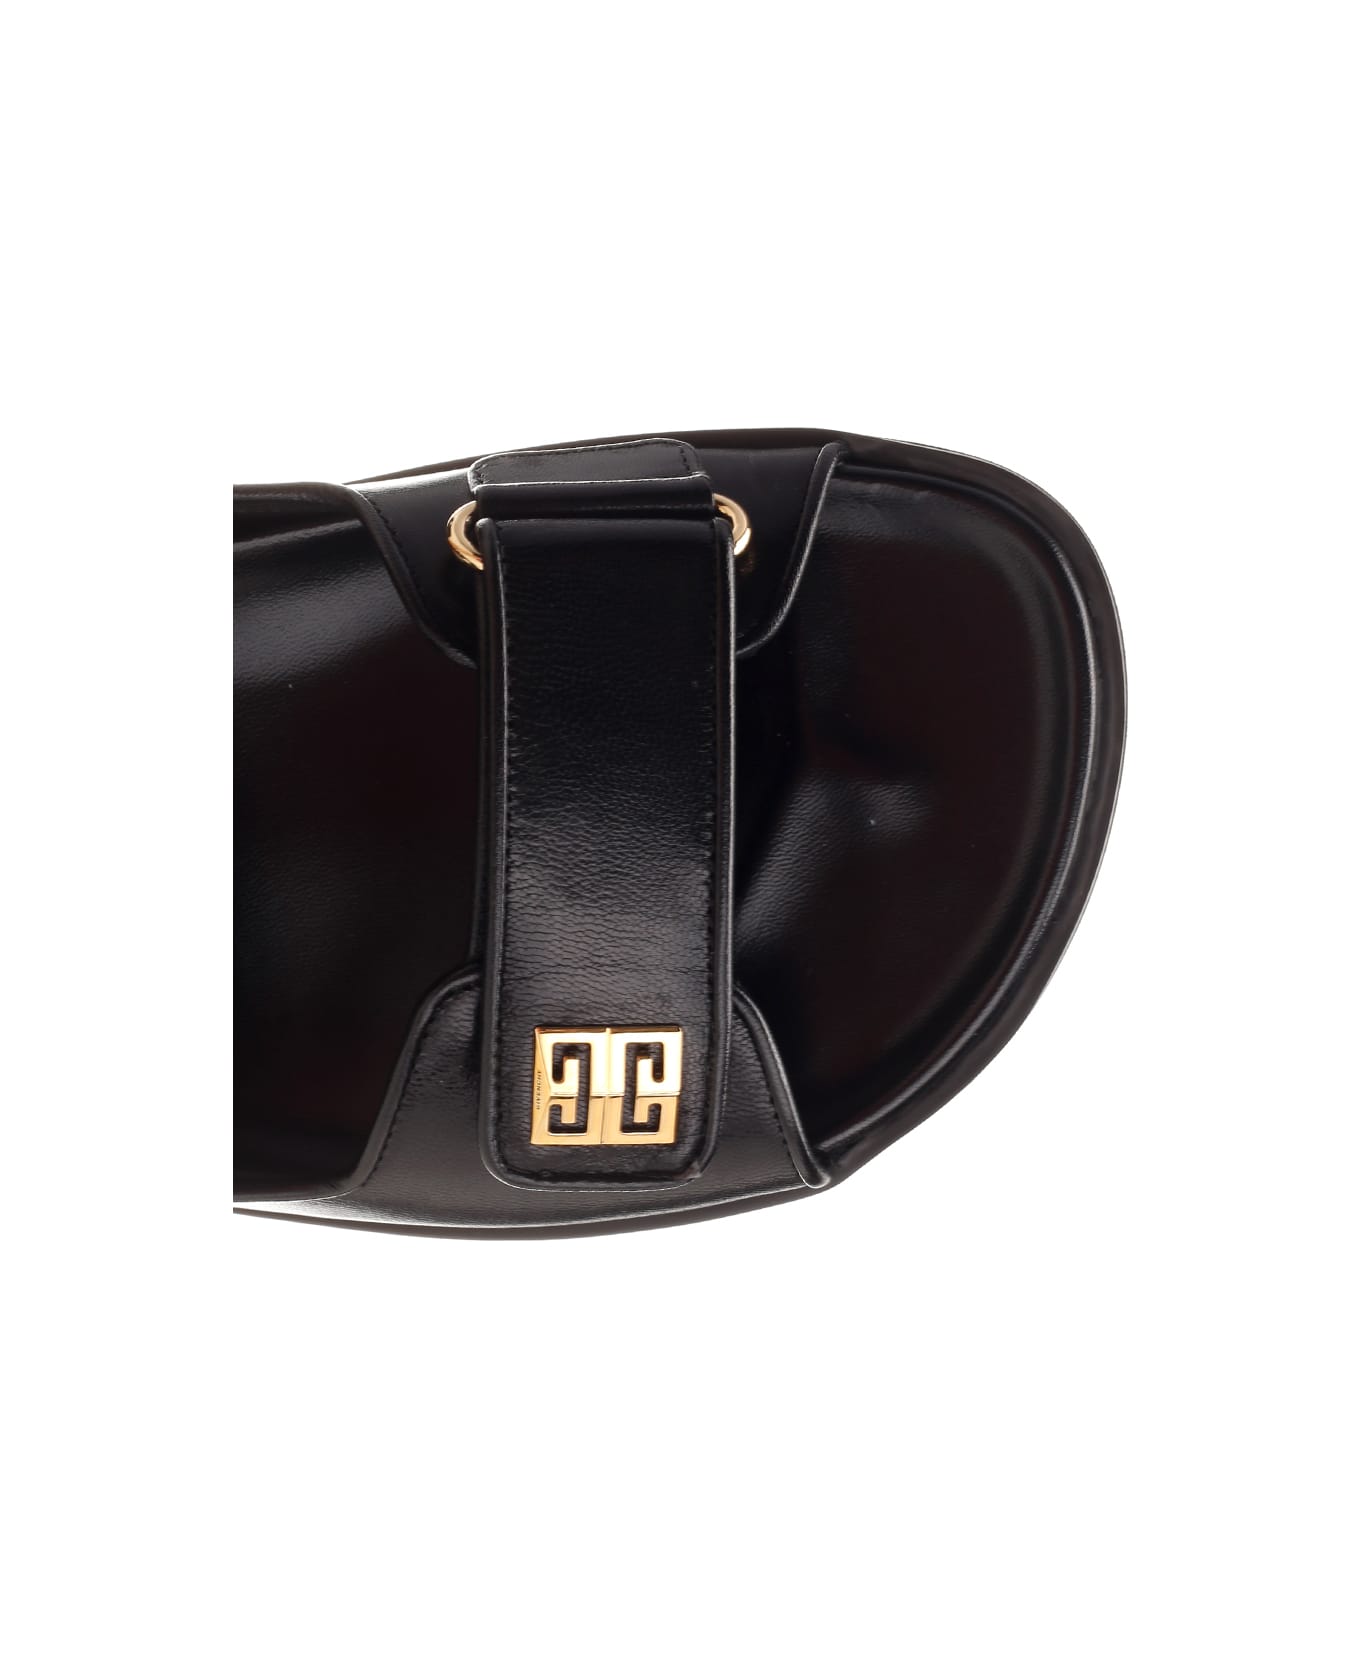 Givenchy 4g Leather Sandals - black サンダル